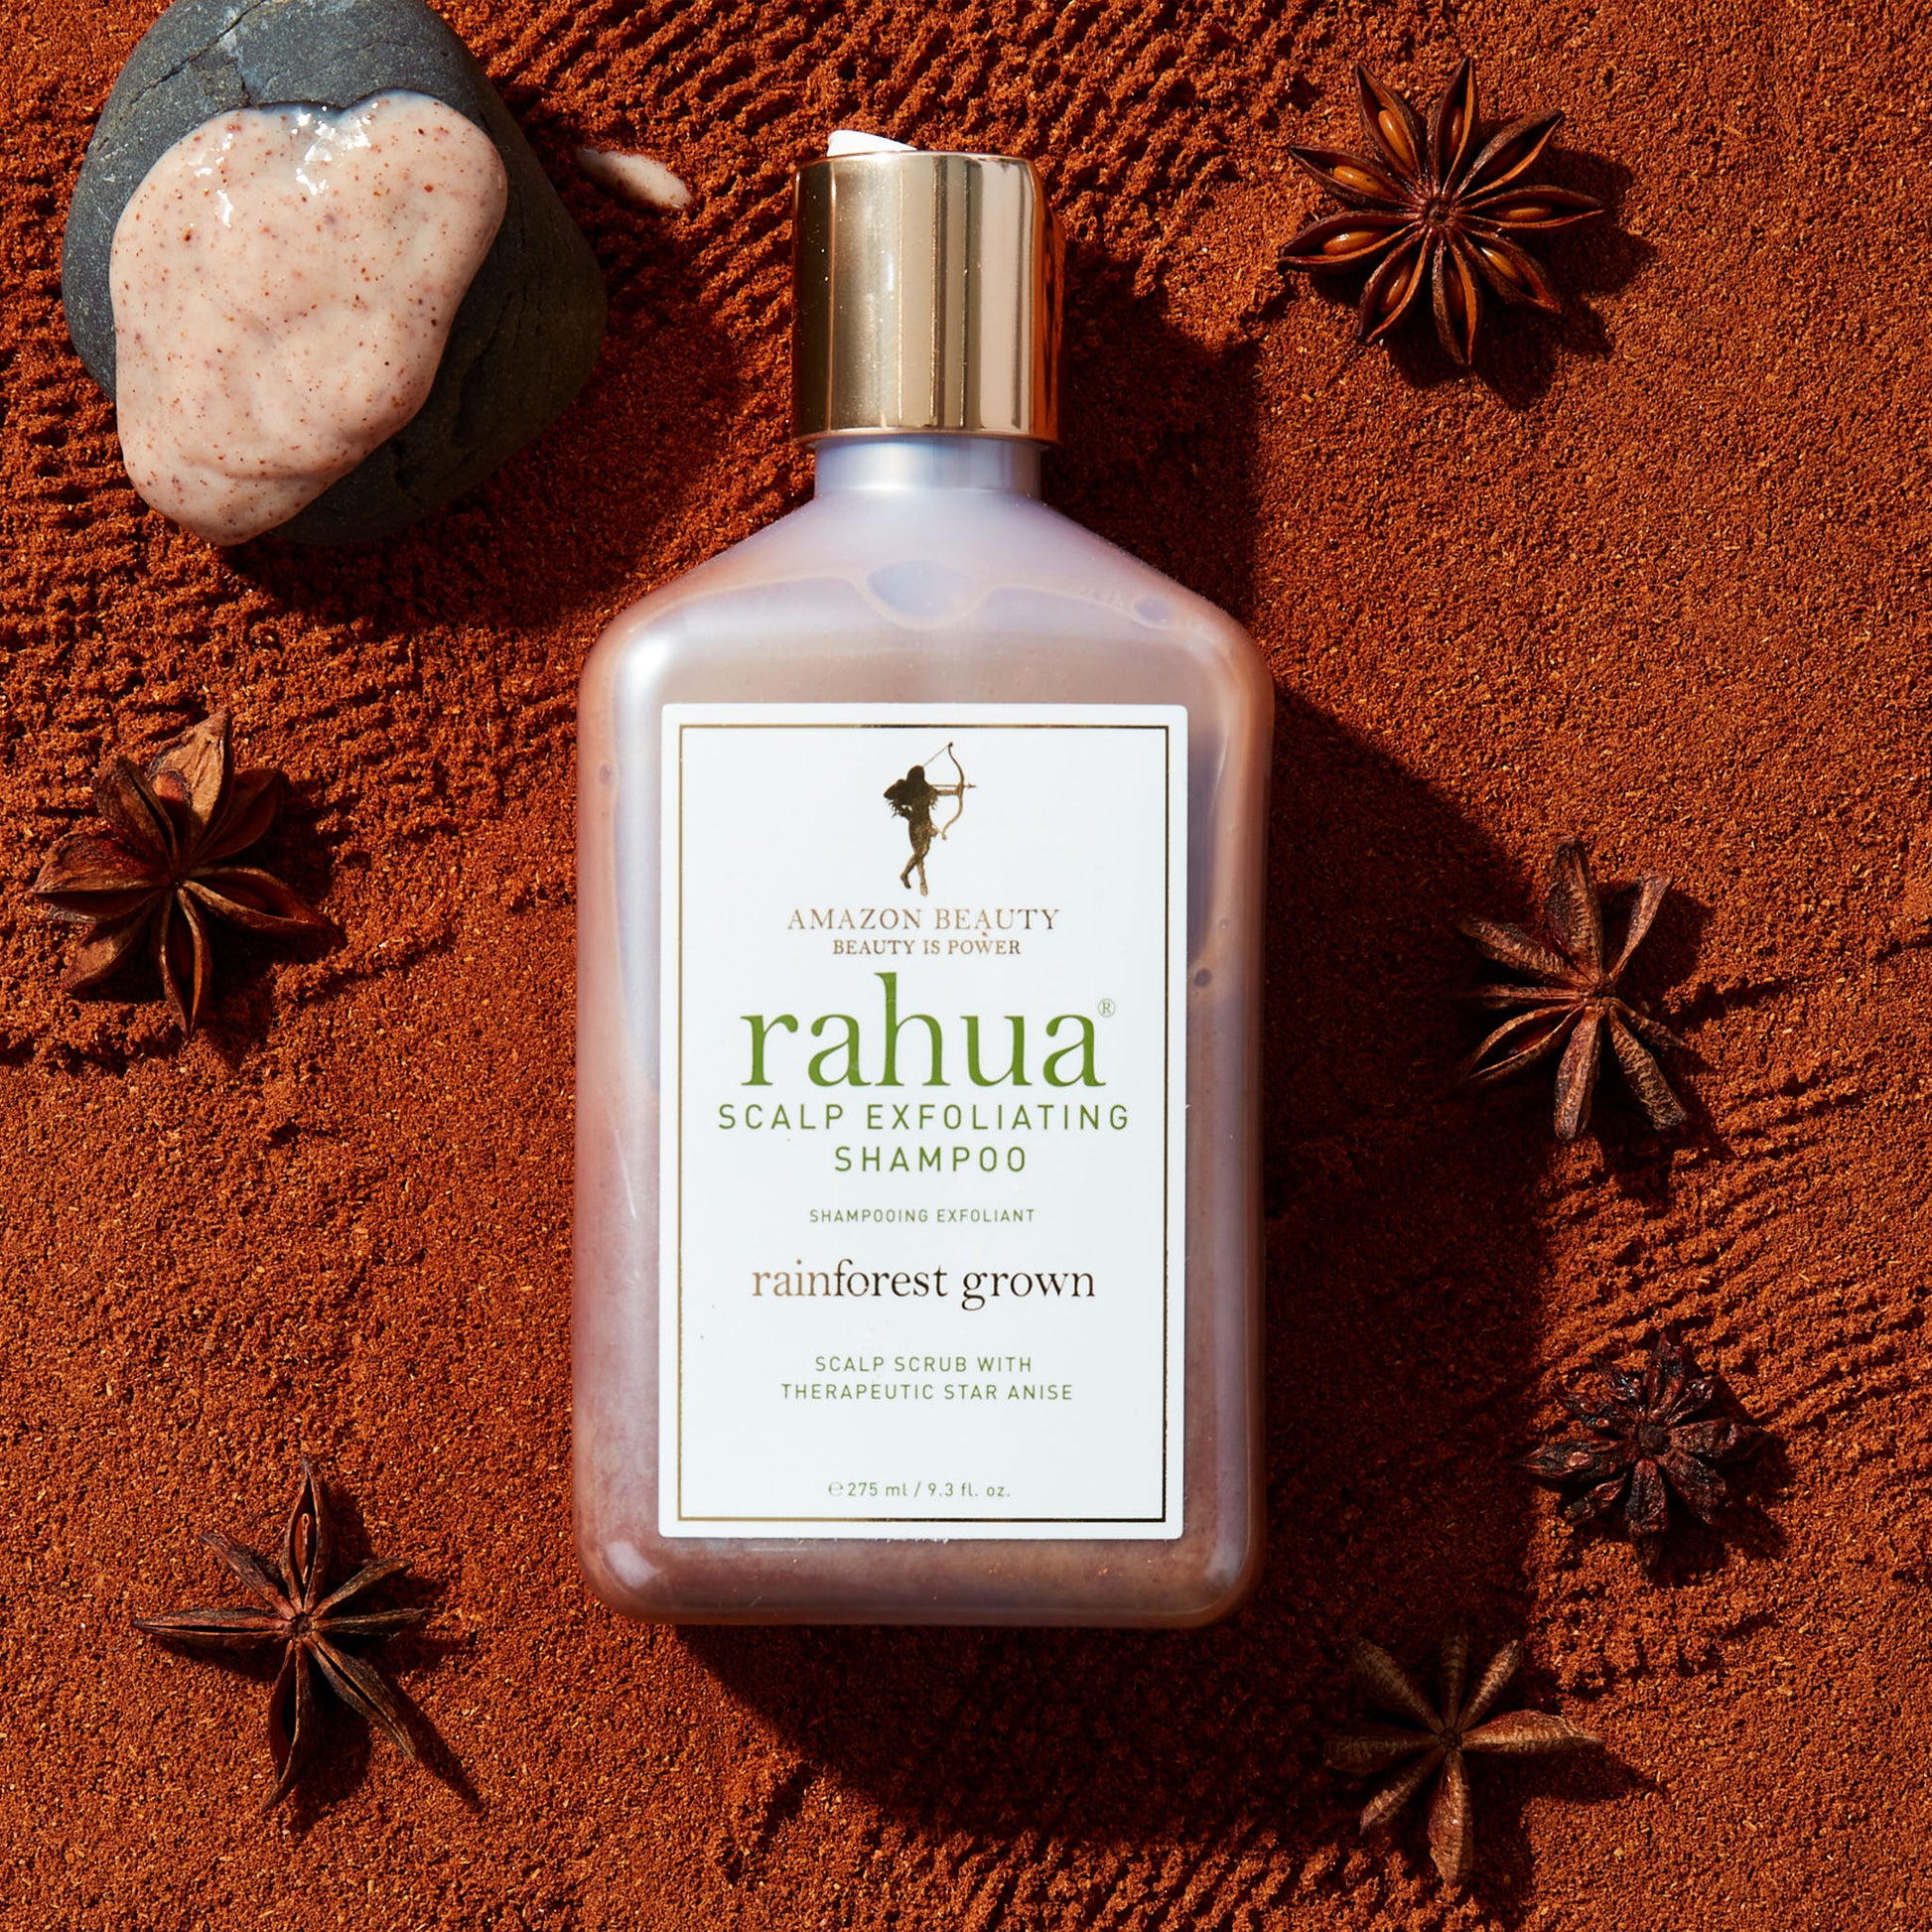 Rahua scalp exfoliating shampoo with natural ingredient star anise and sacha inchi placed on a brown sand